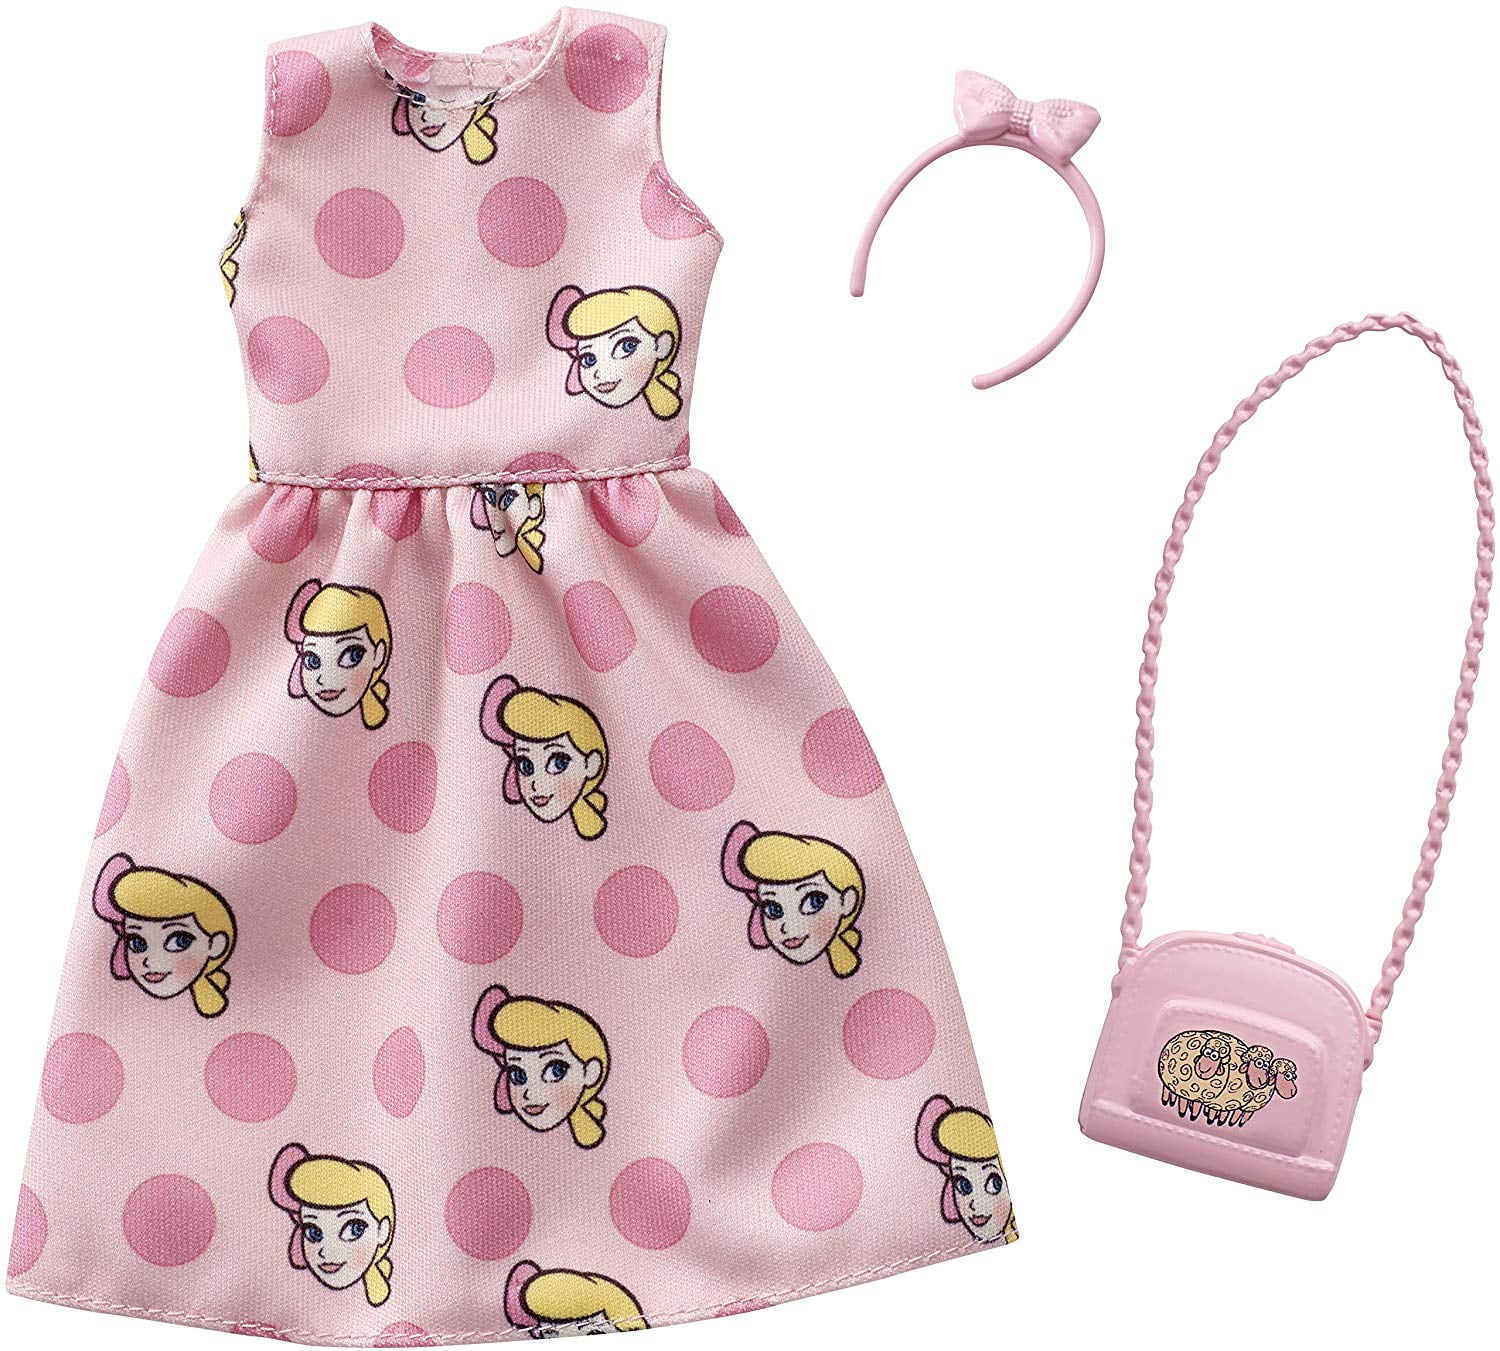 Barbie Peanuts Charlie Brown Fashion Pack with Accessories 